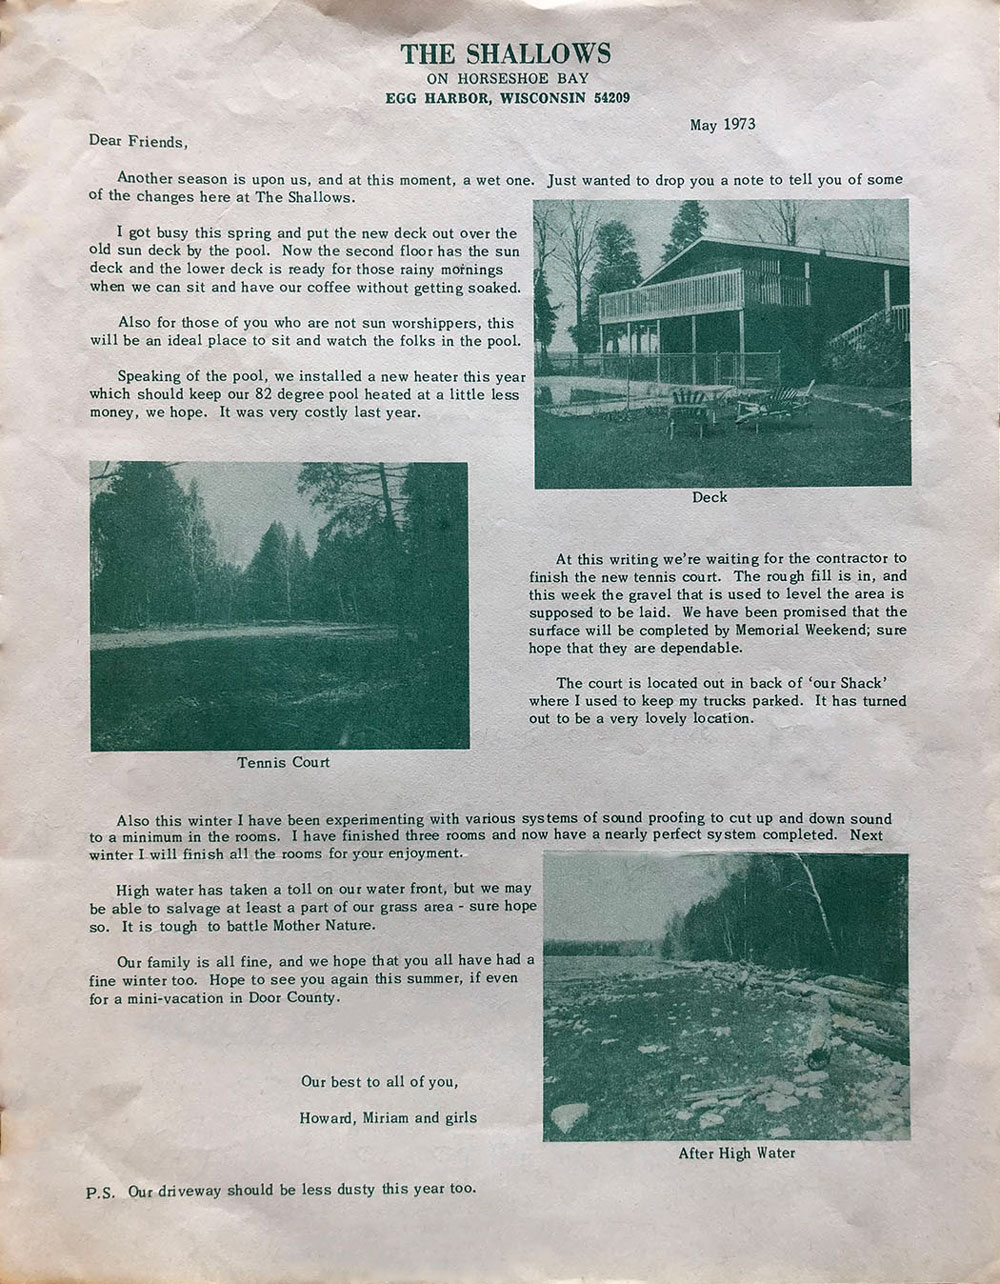 Vintage newsletter describing Shallows accommodations